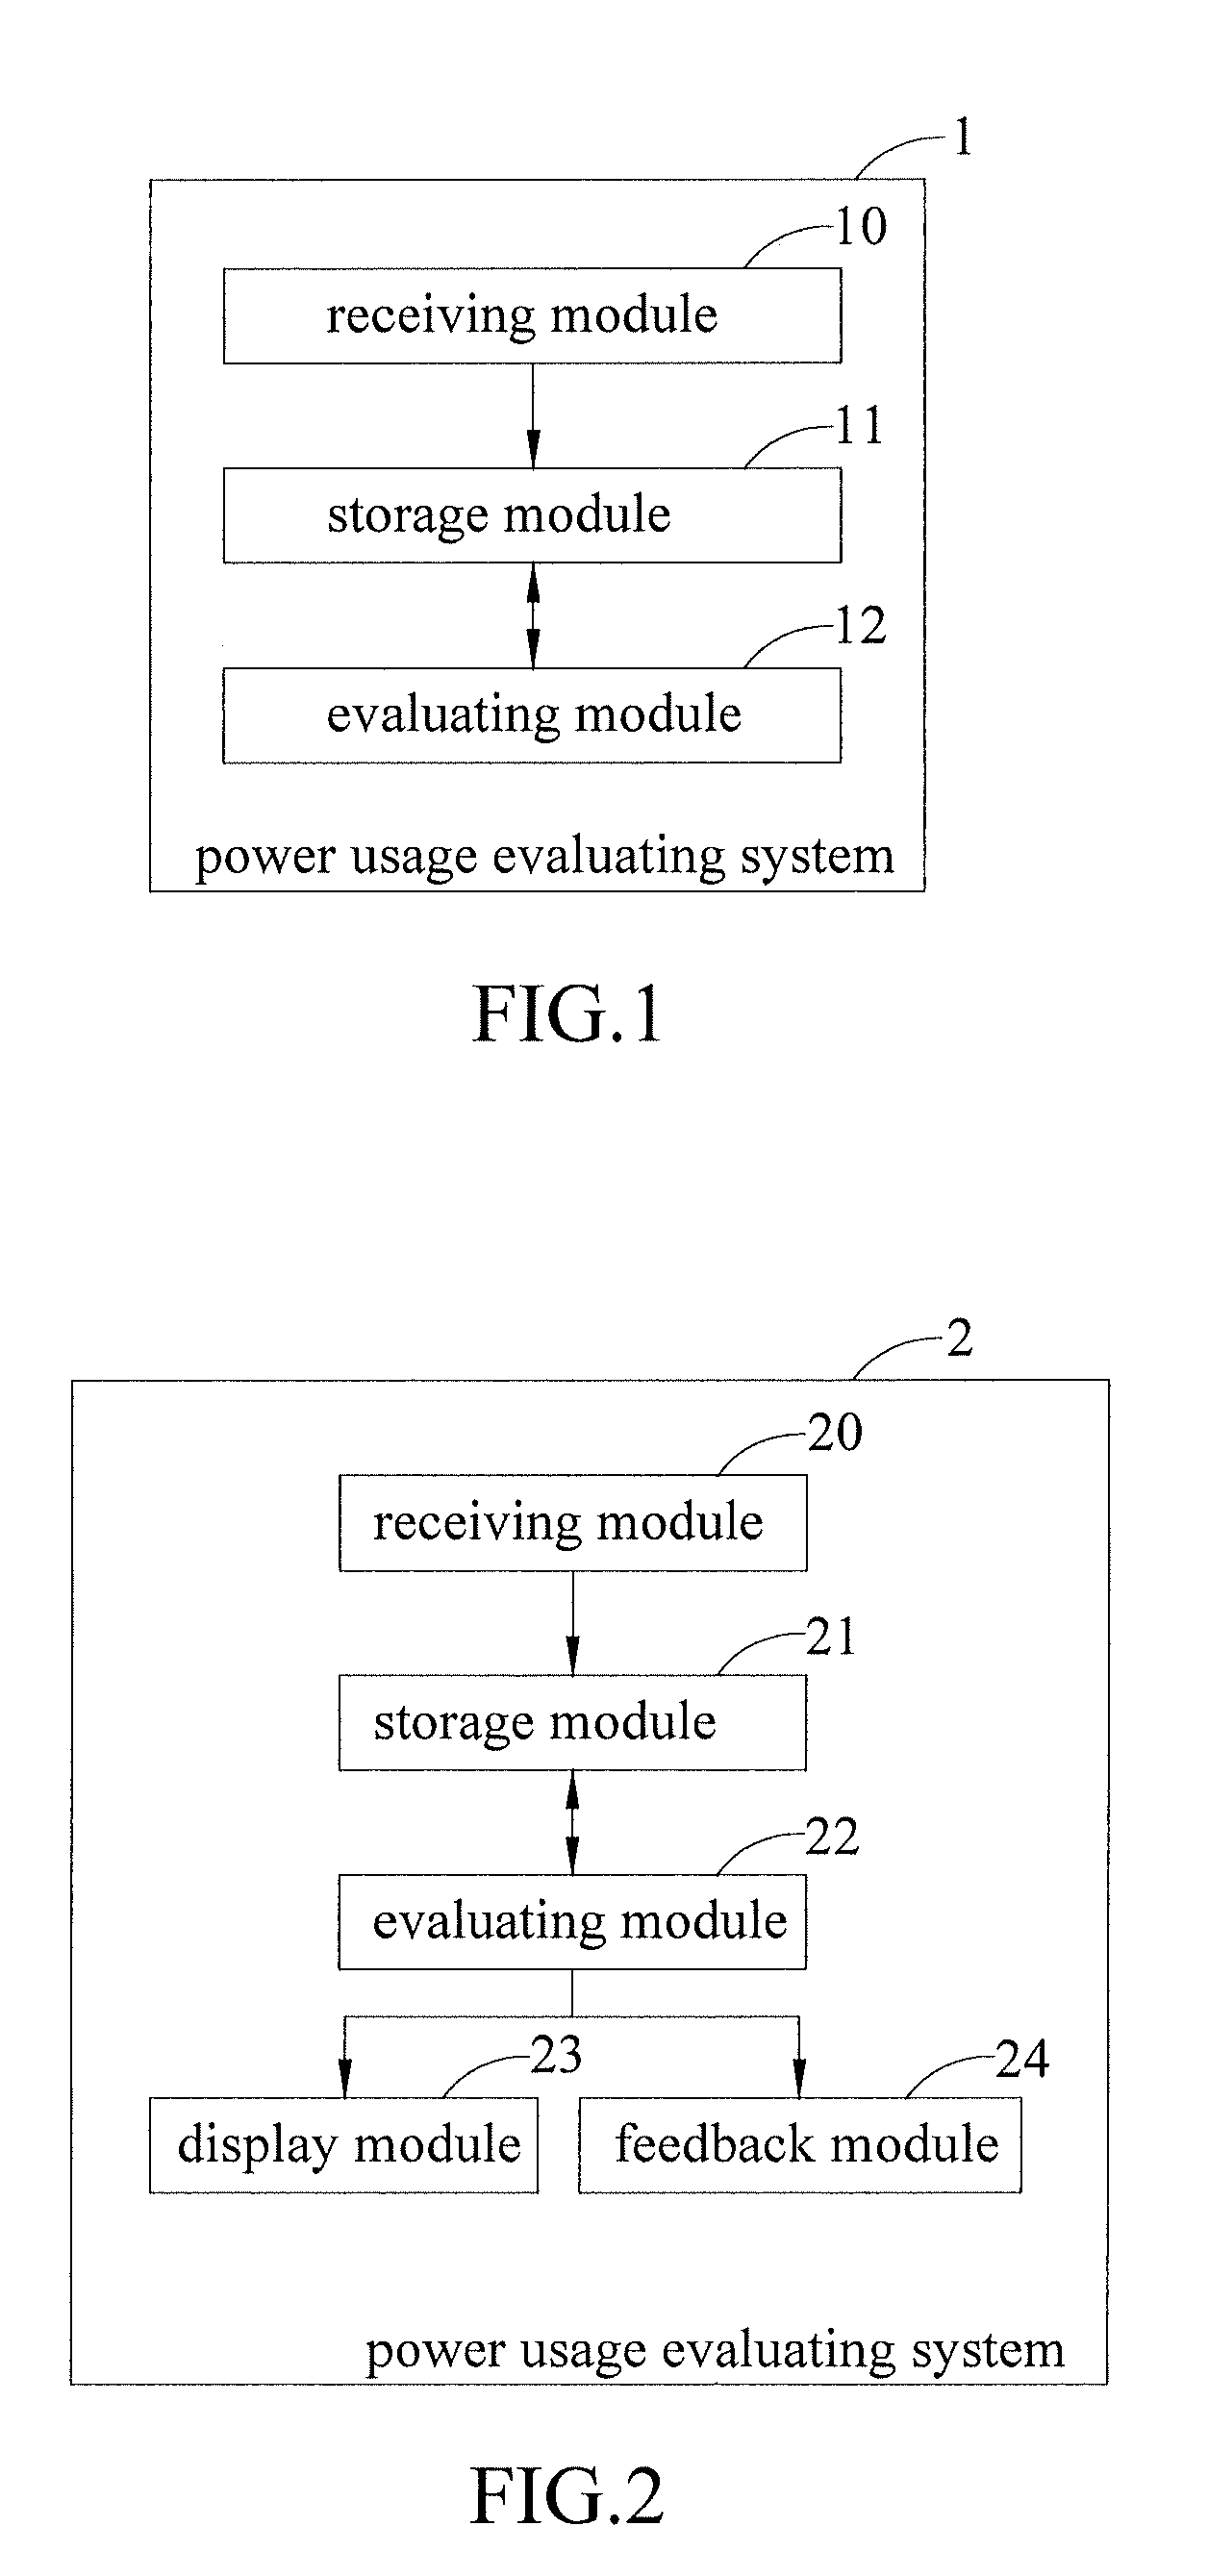 System and method for evaluating power usage